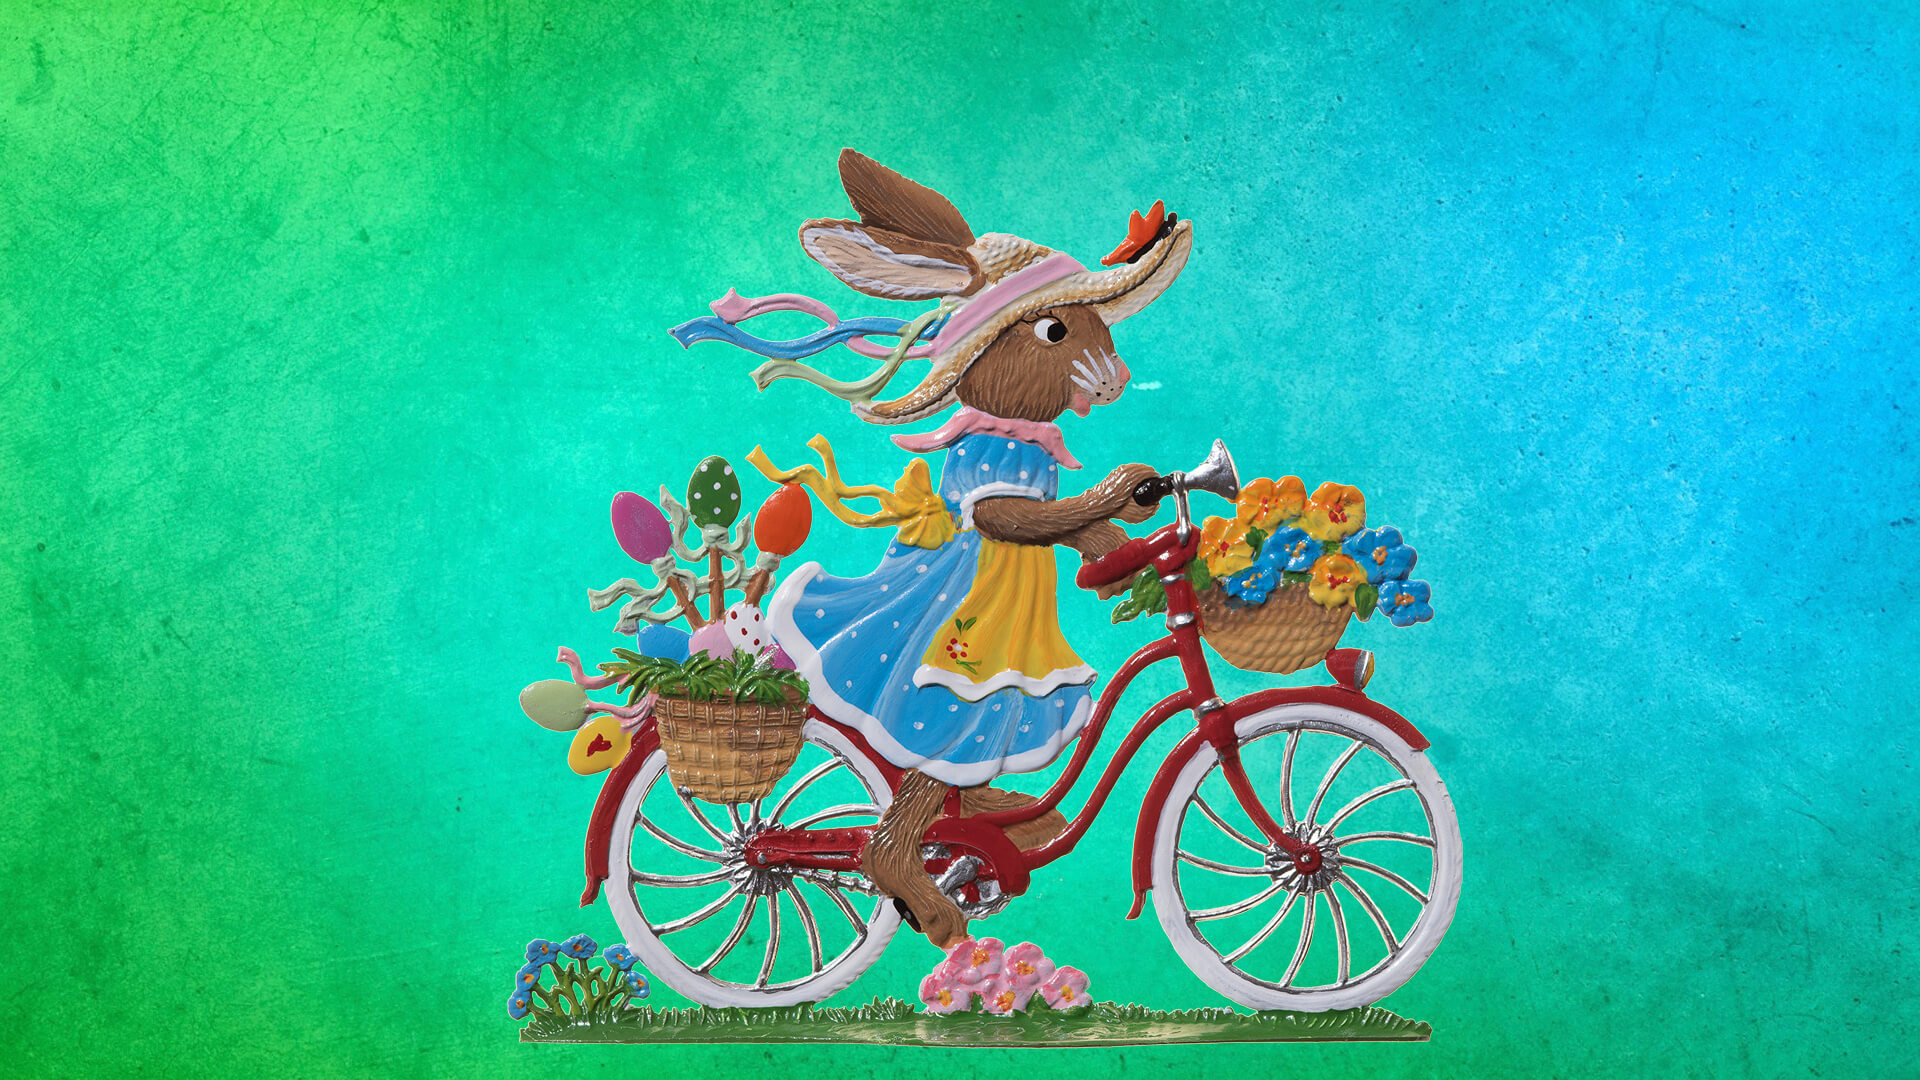 Spring with Bunny on Bicycle by Wilhelm Schweizer Image